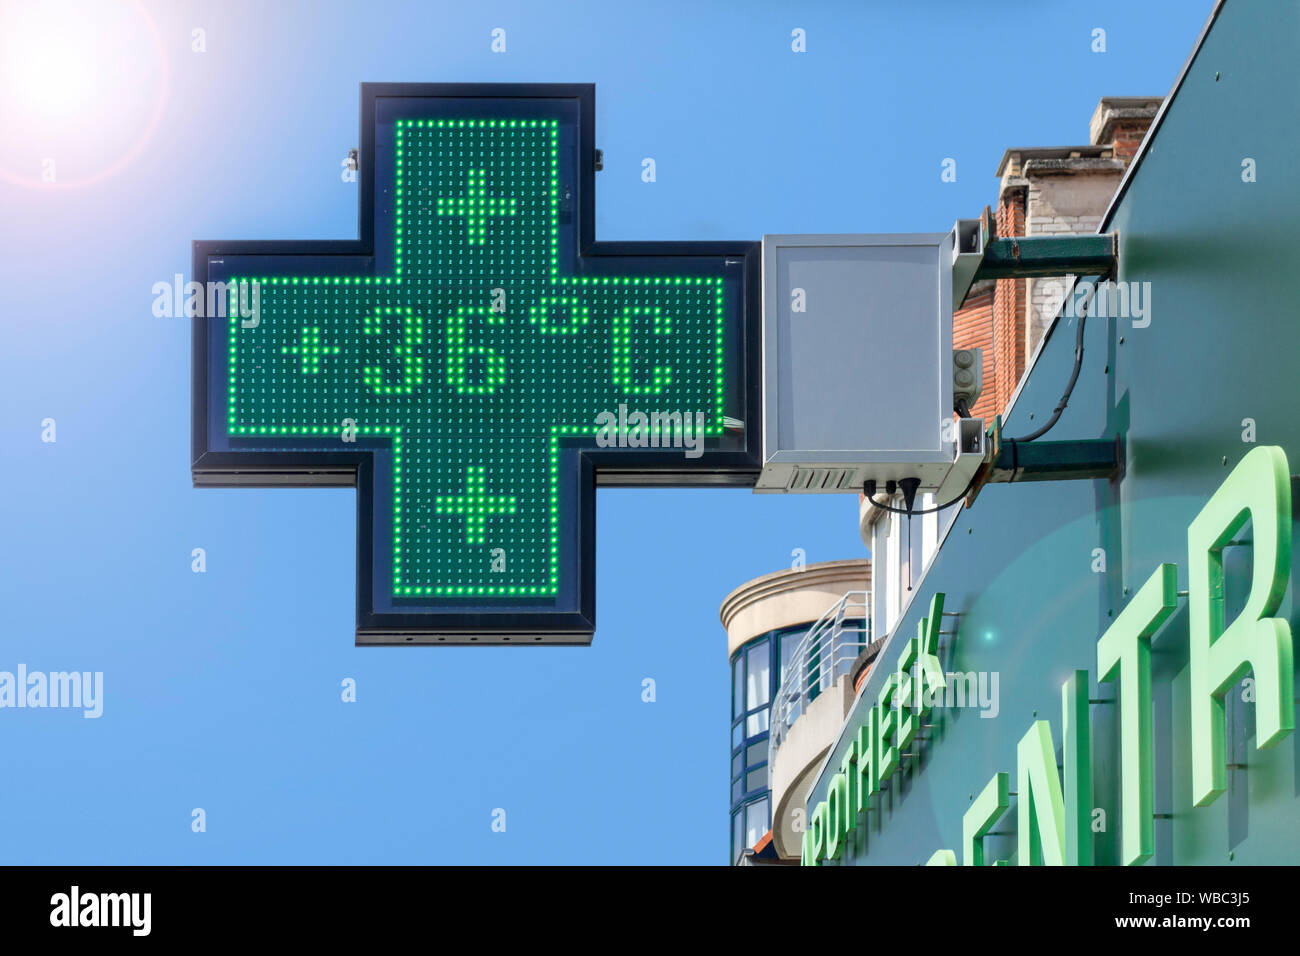 Thermometer in green pharmacy screen sign displays extremely hot temperature of 36 degrees Celsius / 36°C / 36 °C during summer heatwave / heat wave Stock Photo